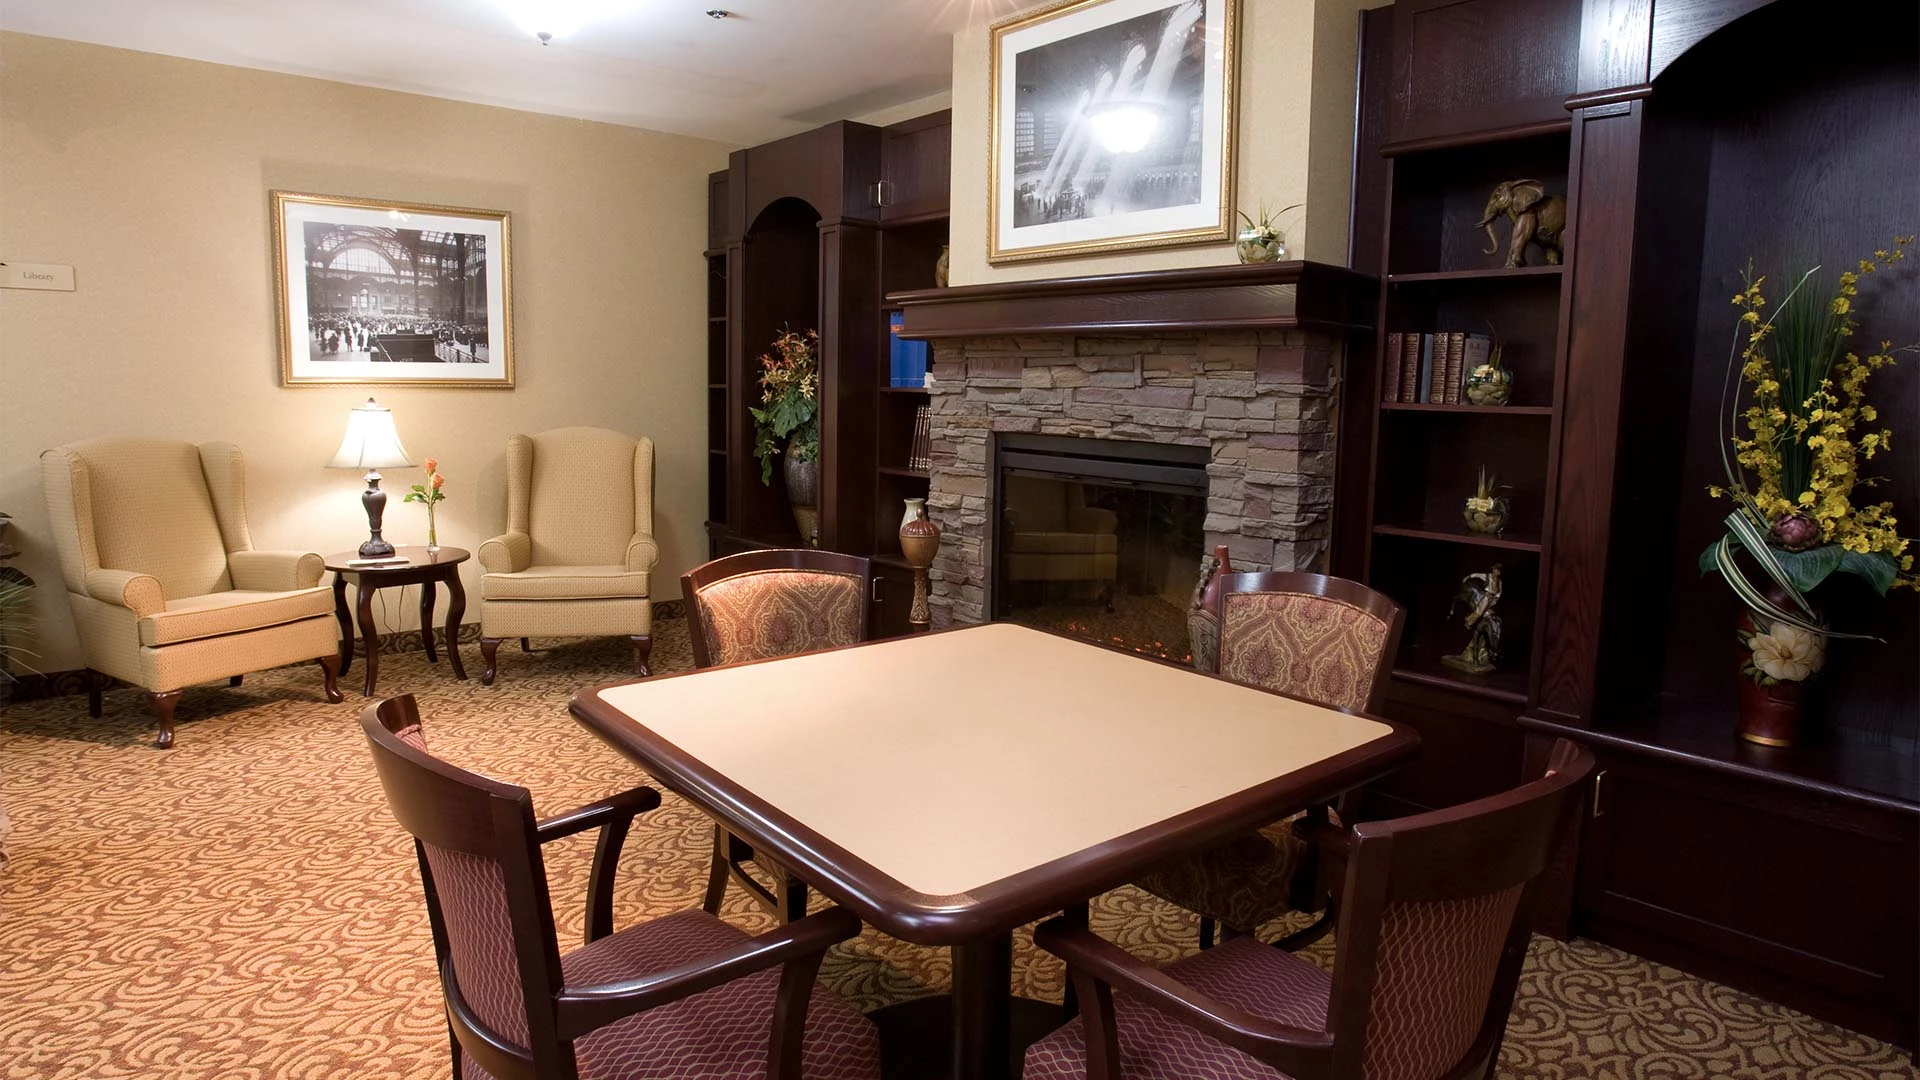 Sitting room with a table, chairs and a fireplace in Summerwood Village senior living